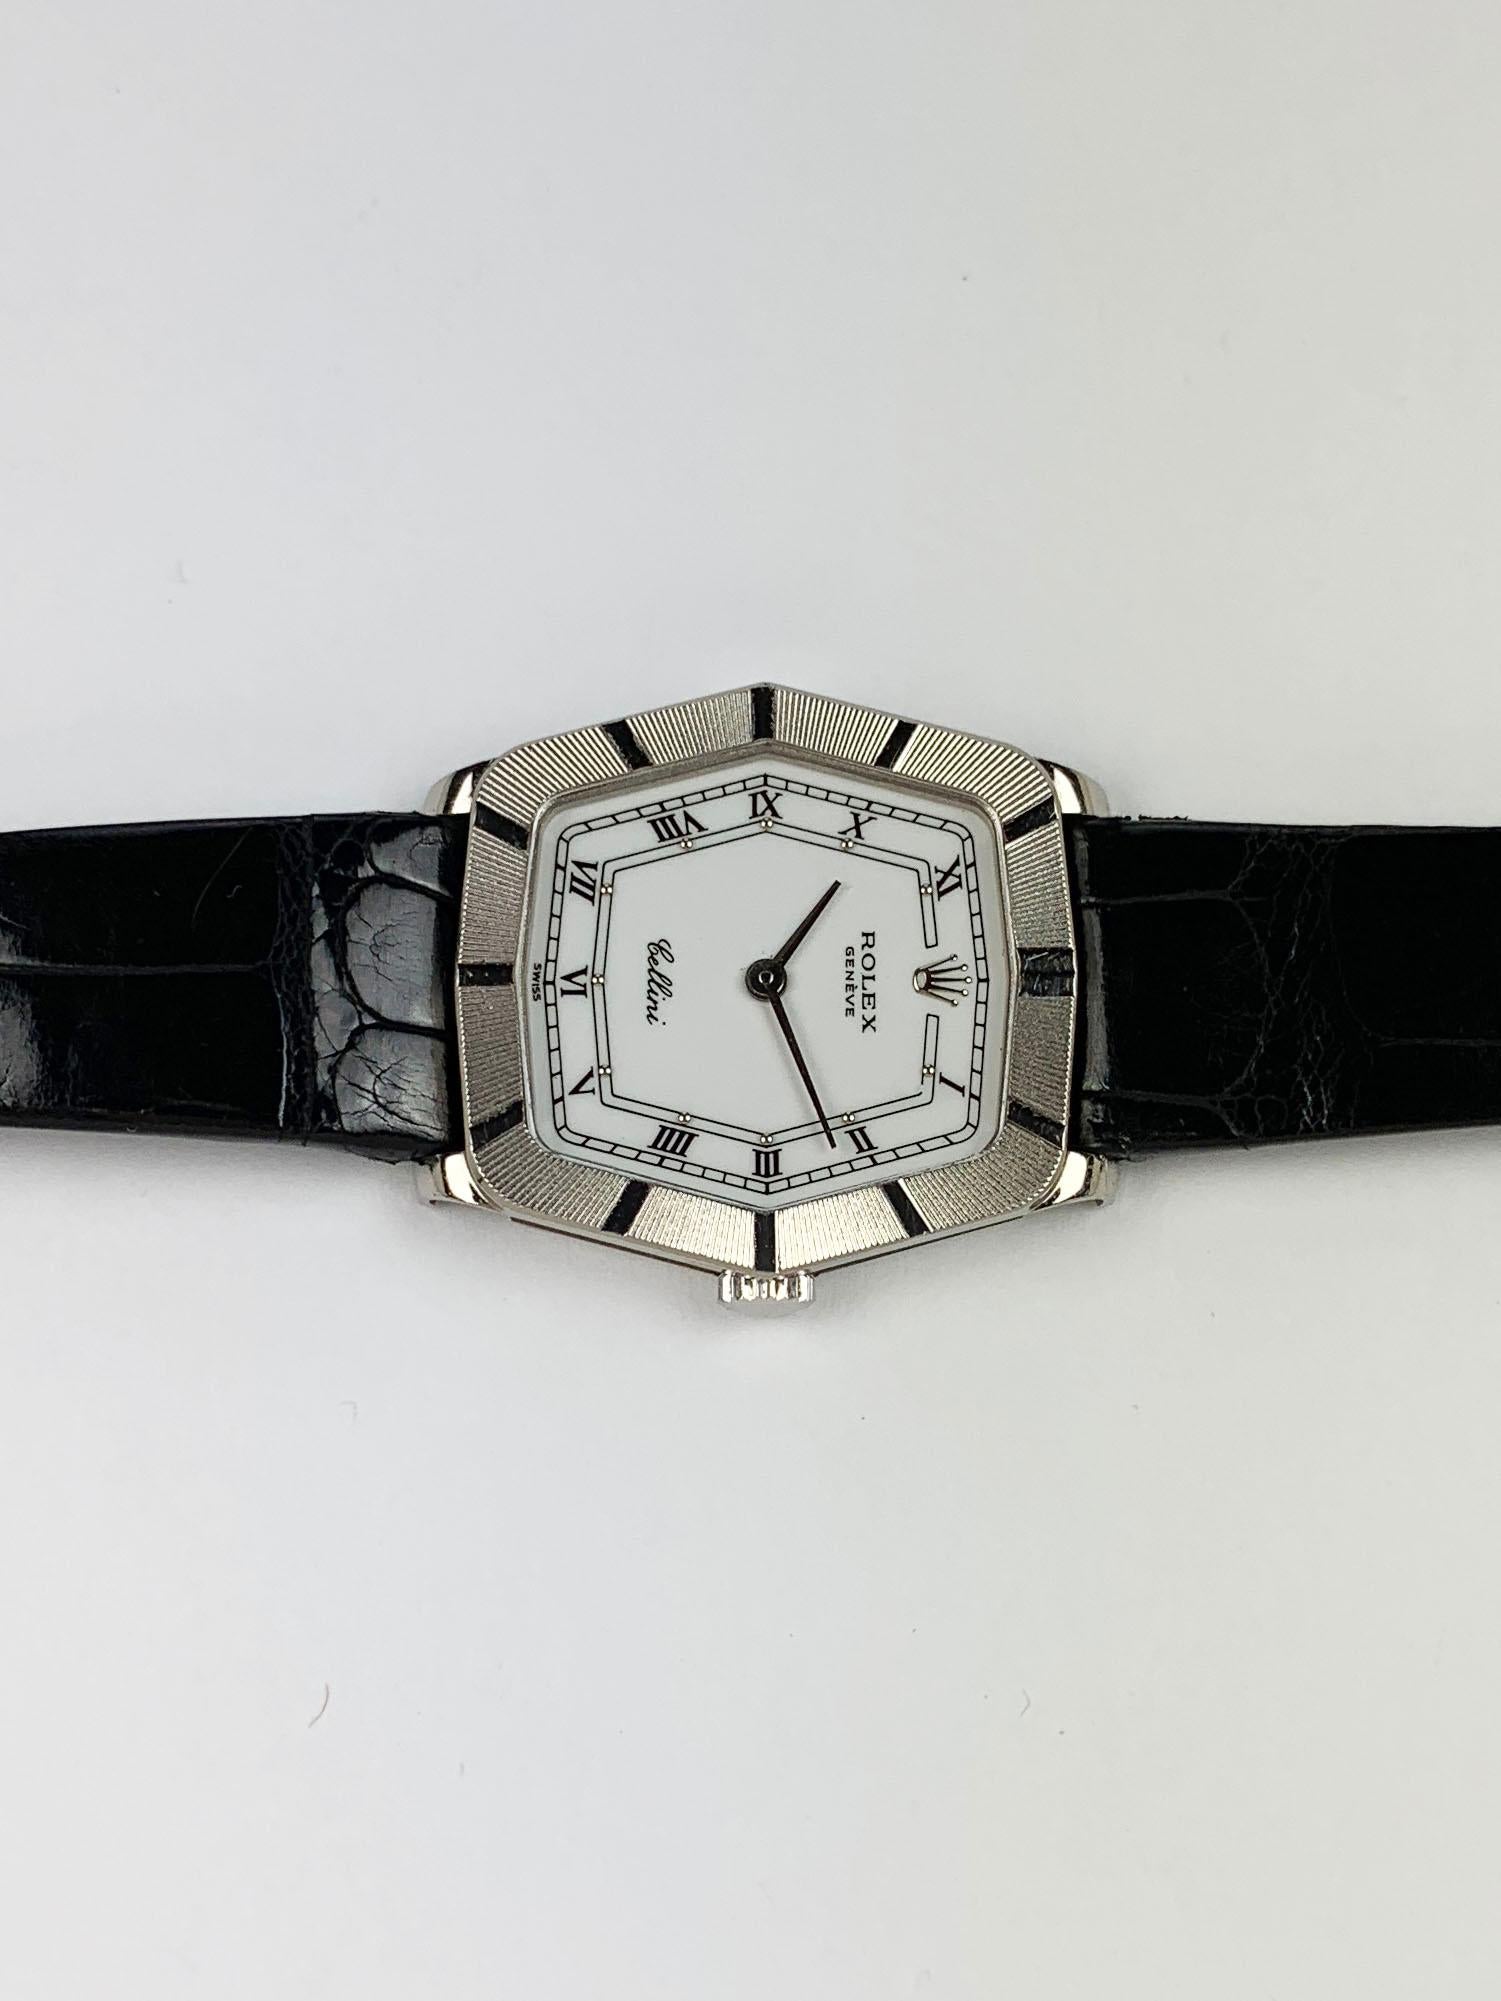 Rolex 18 Karat White Gold Cellini Geometric Manual Wind Wristwatch In Excellent Condition For Sale In New York, NY